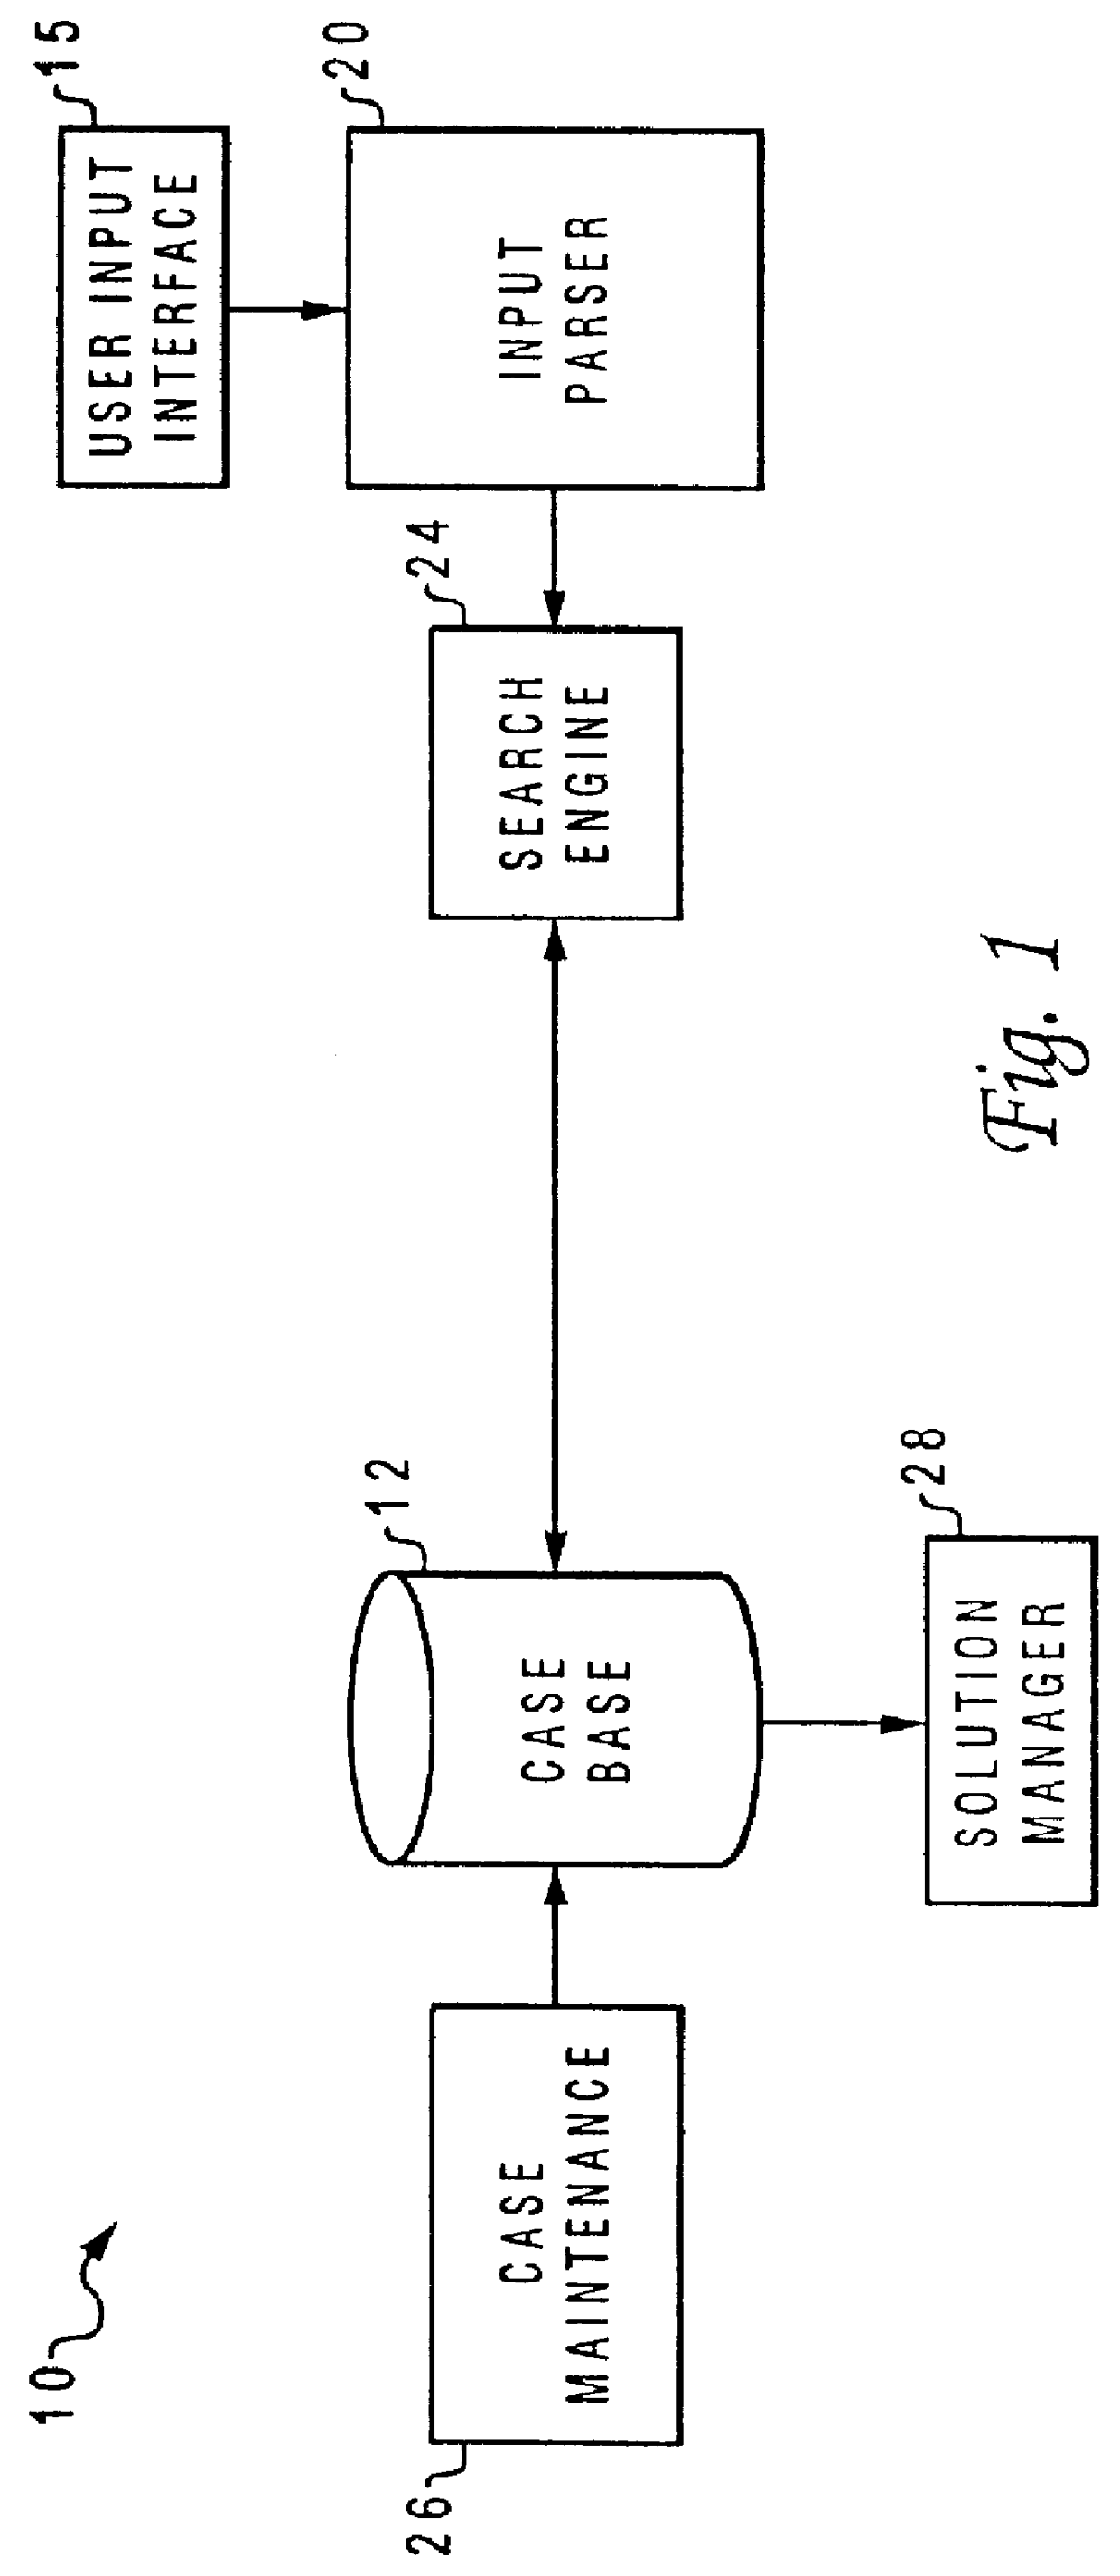 Case-based reasoning system and method for scoring cases in a case database